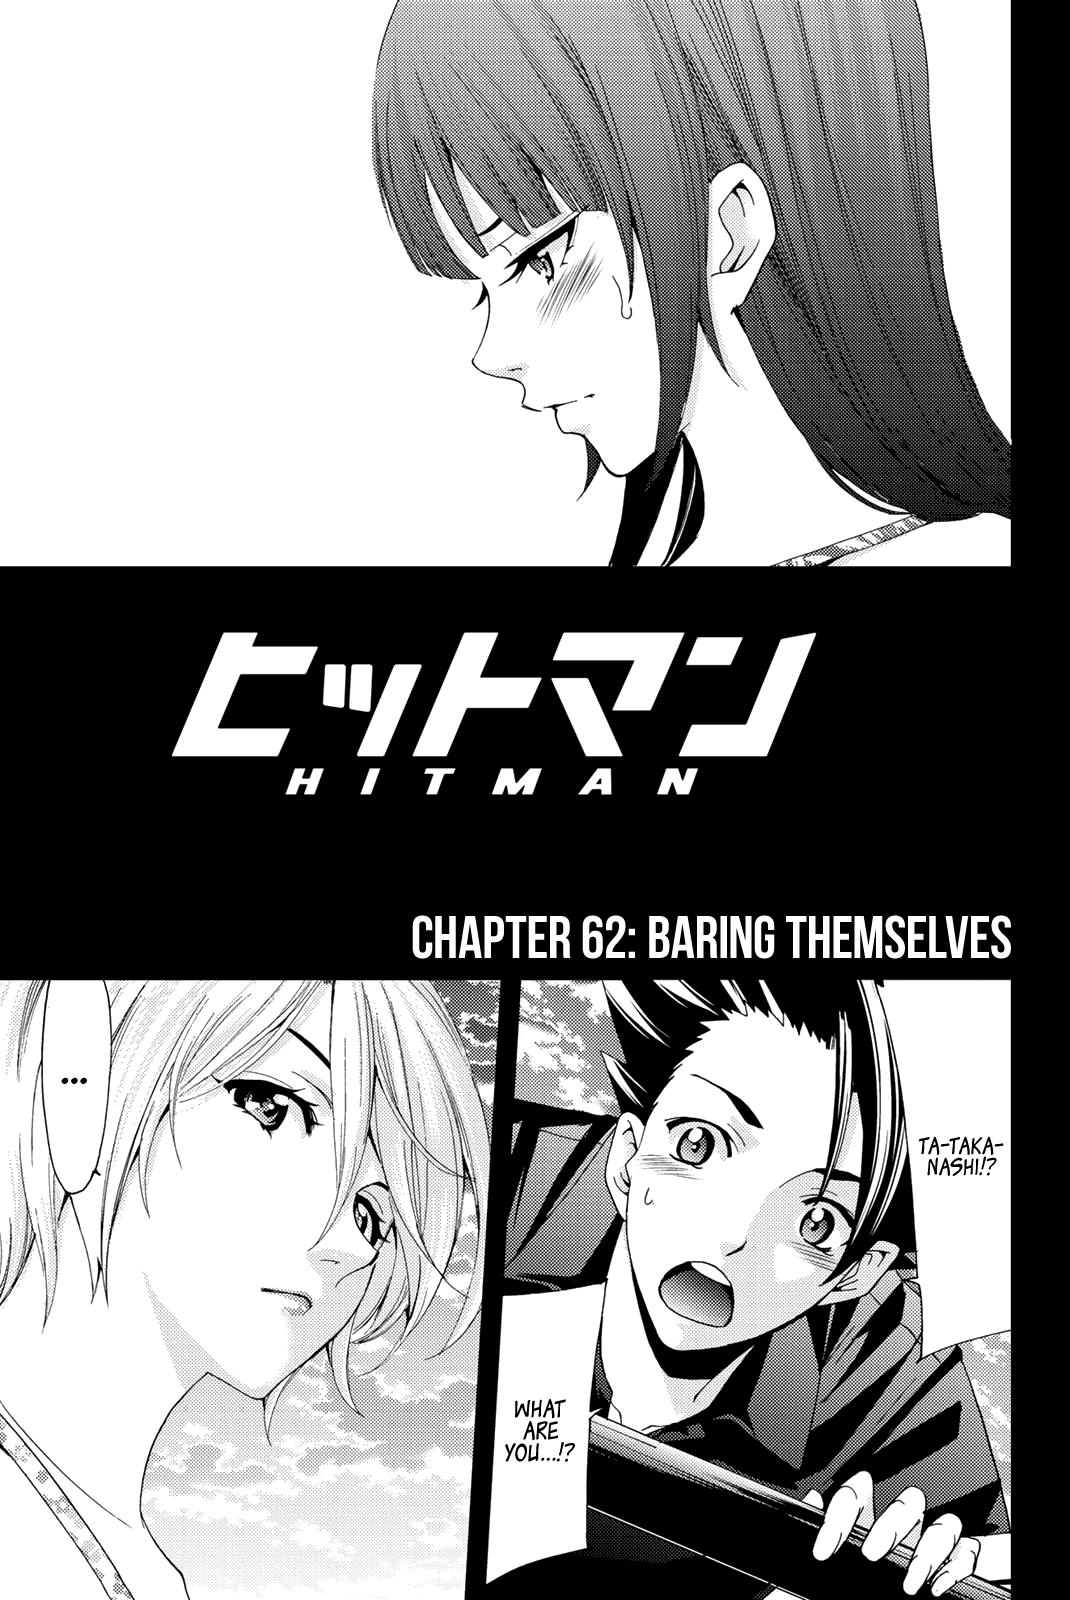 Hitman (Kouji Seo) Chapter 62: Baring Themselves - Picture 2